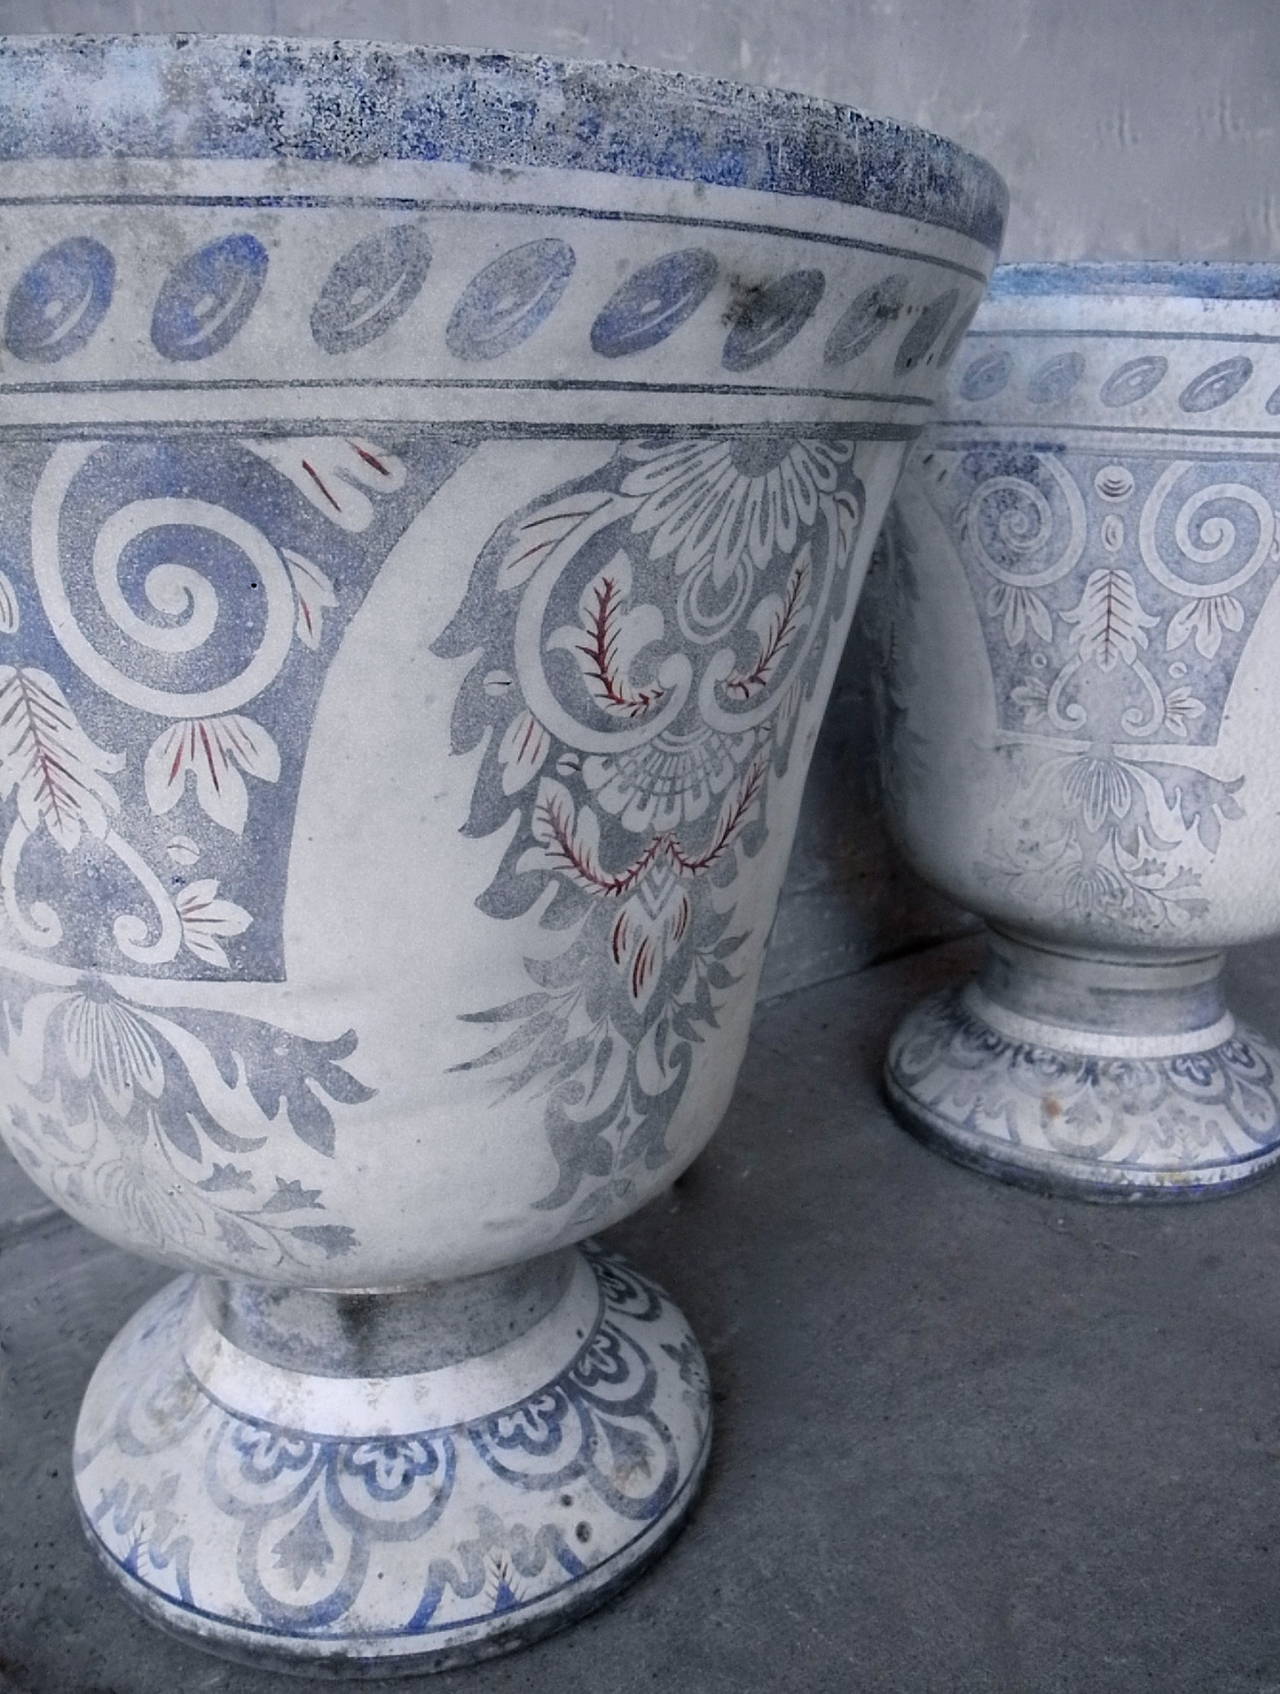 This pair of exquisite 19th century Jarres de Rouen are decorated with a traditional blue and red lambrequin pattern. True to this classic style, these grand vases are enameled cast iron and were signed by their maker, E. Paris & Cie. With their